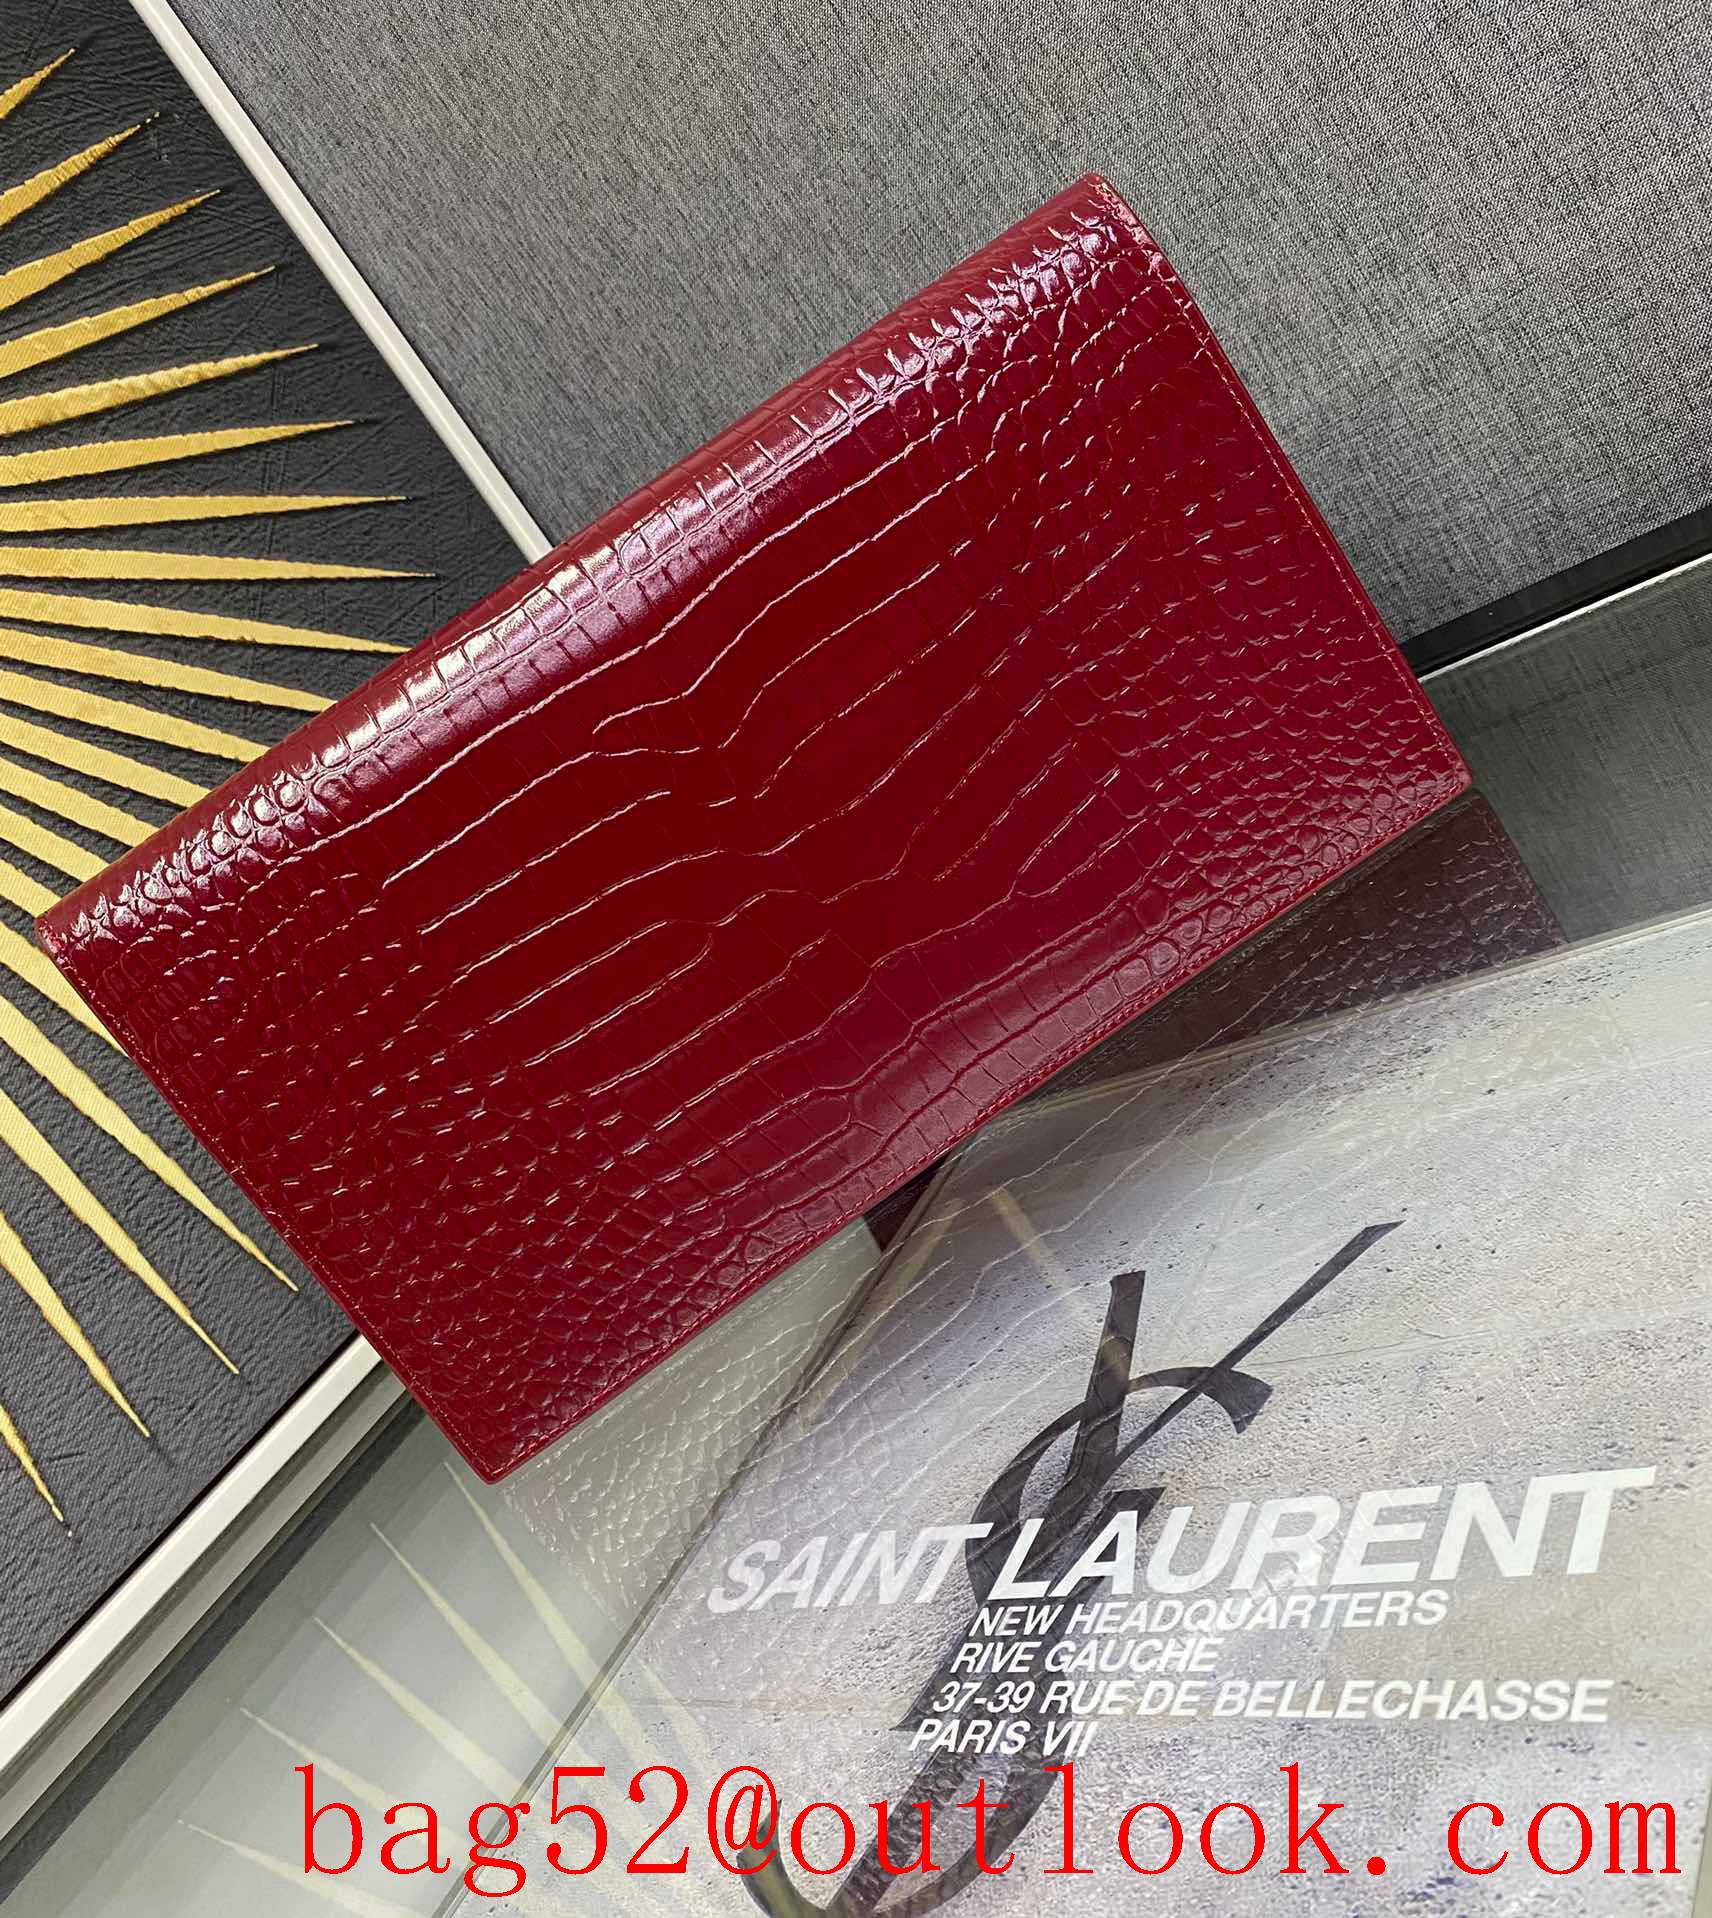 Saint Laurent YSL Uptown Pouch Clutch Bag in Crocodile Embossed Leather Wine 565739